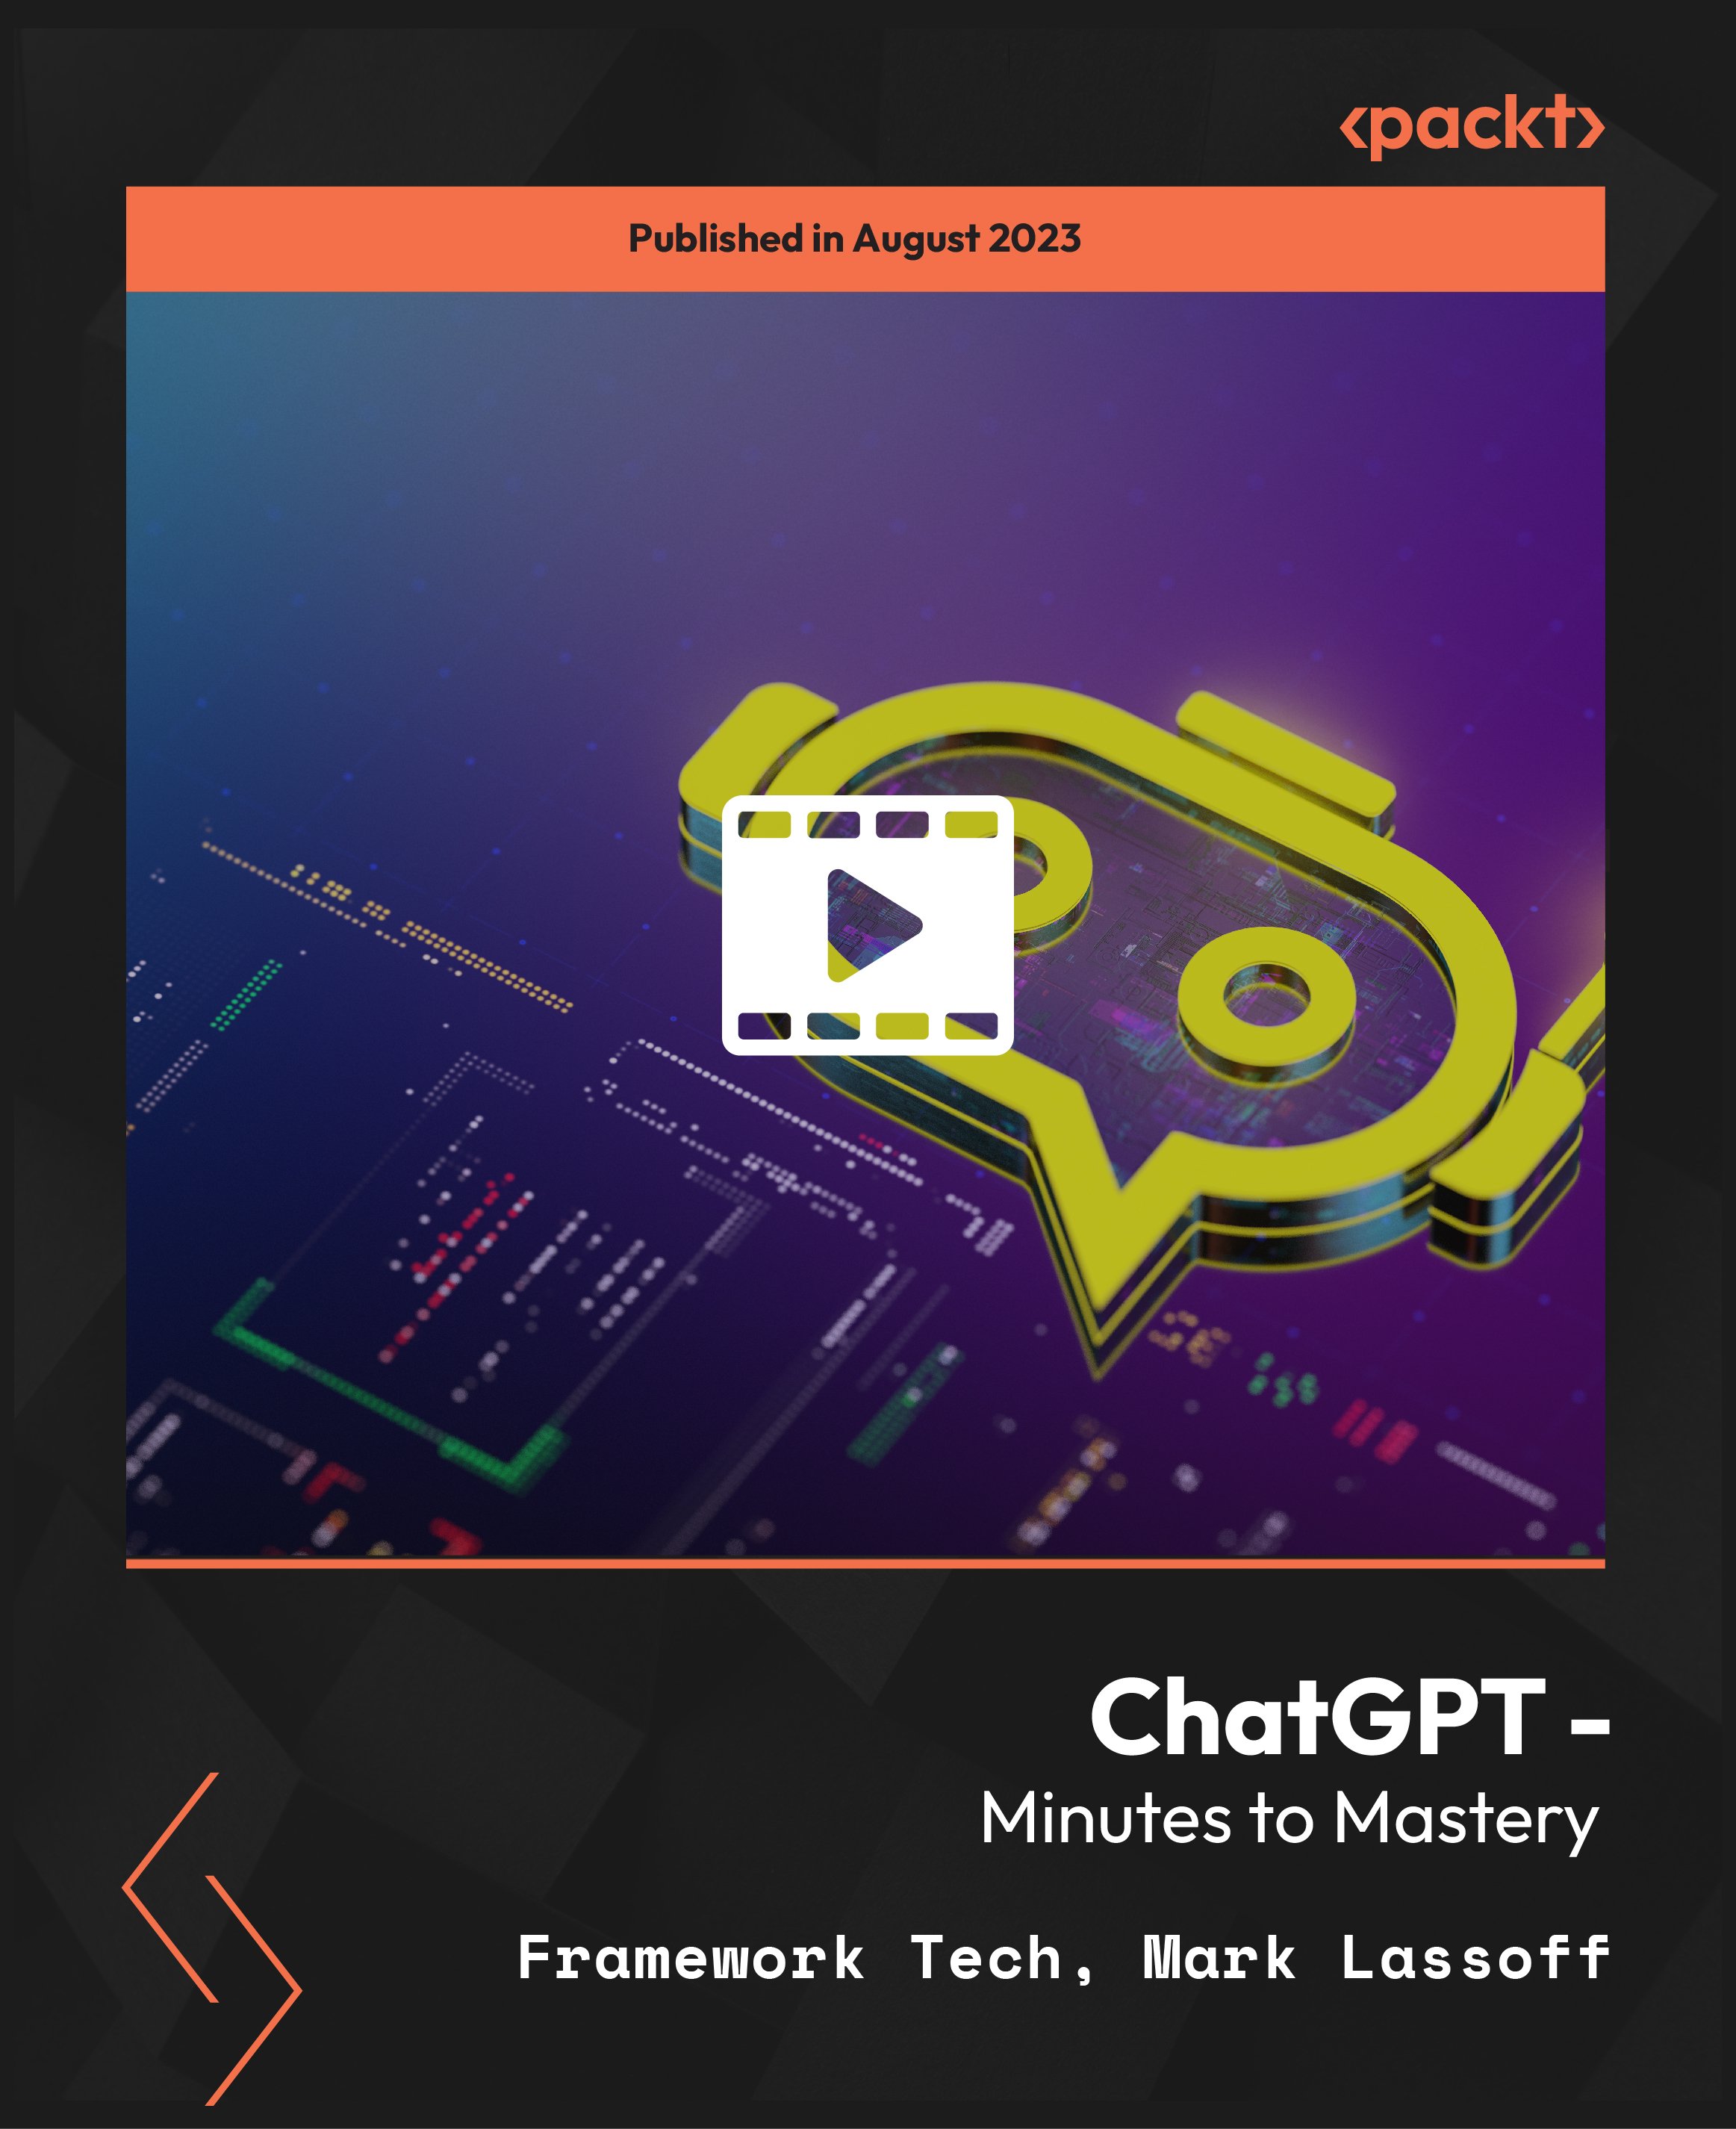 ChatGPT - Minutes to Mastery